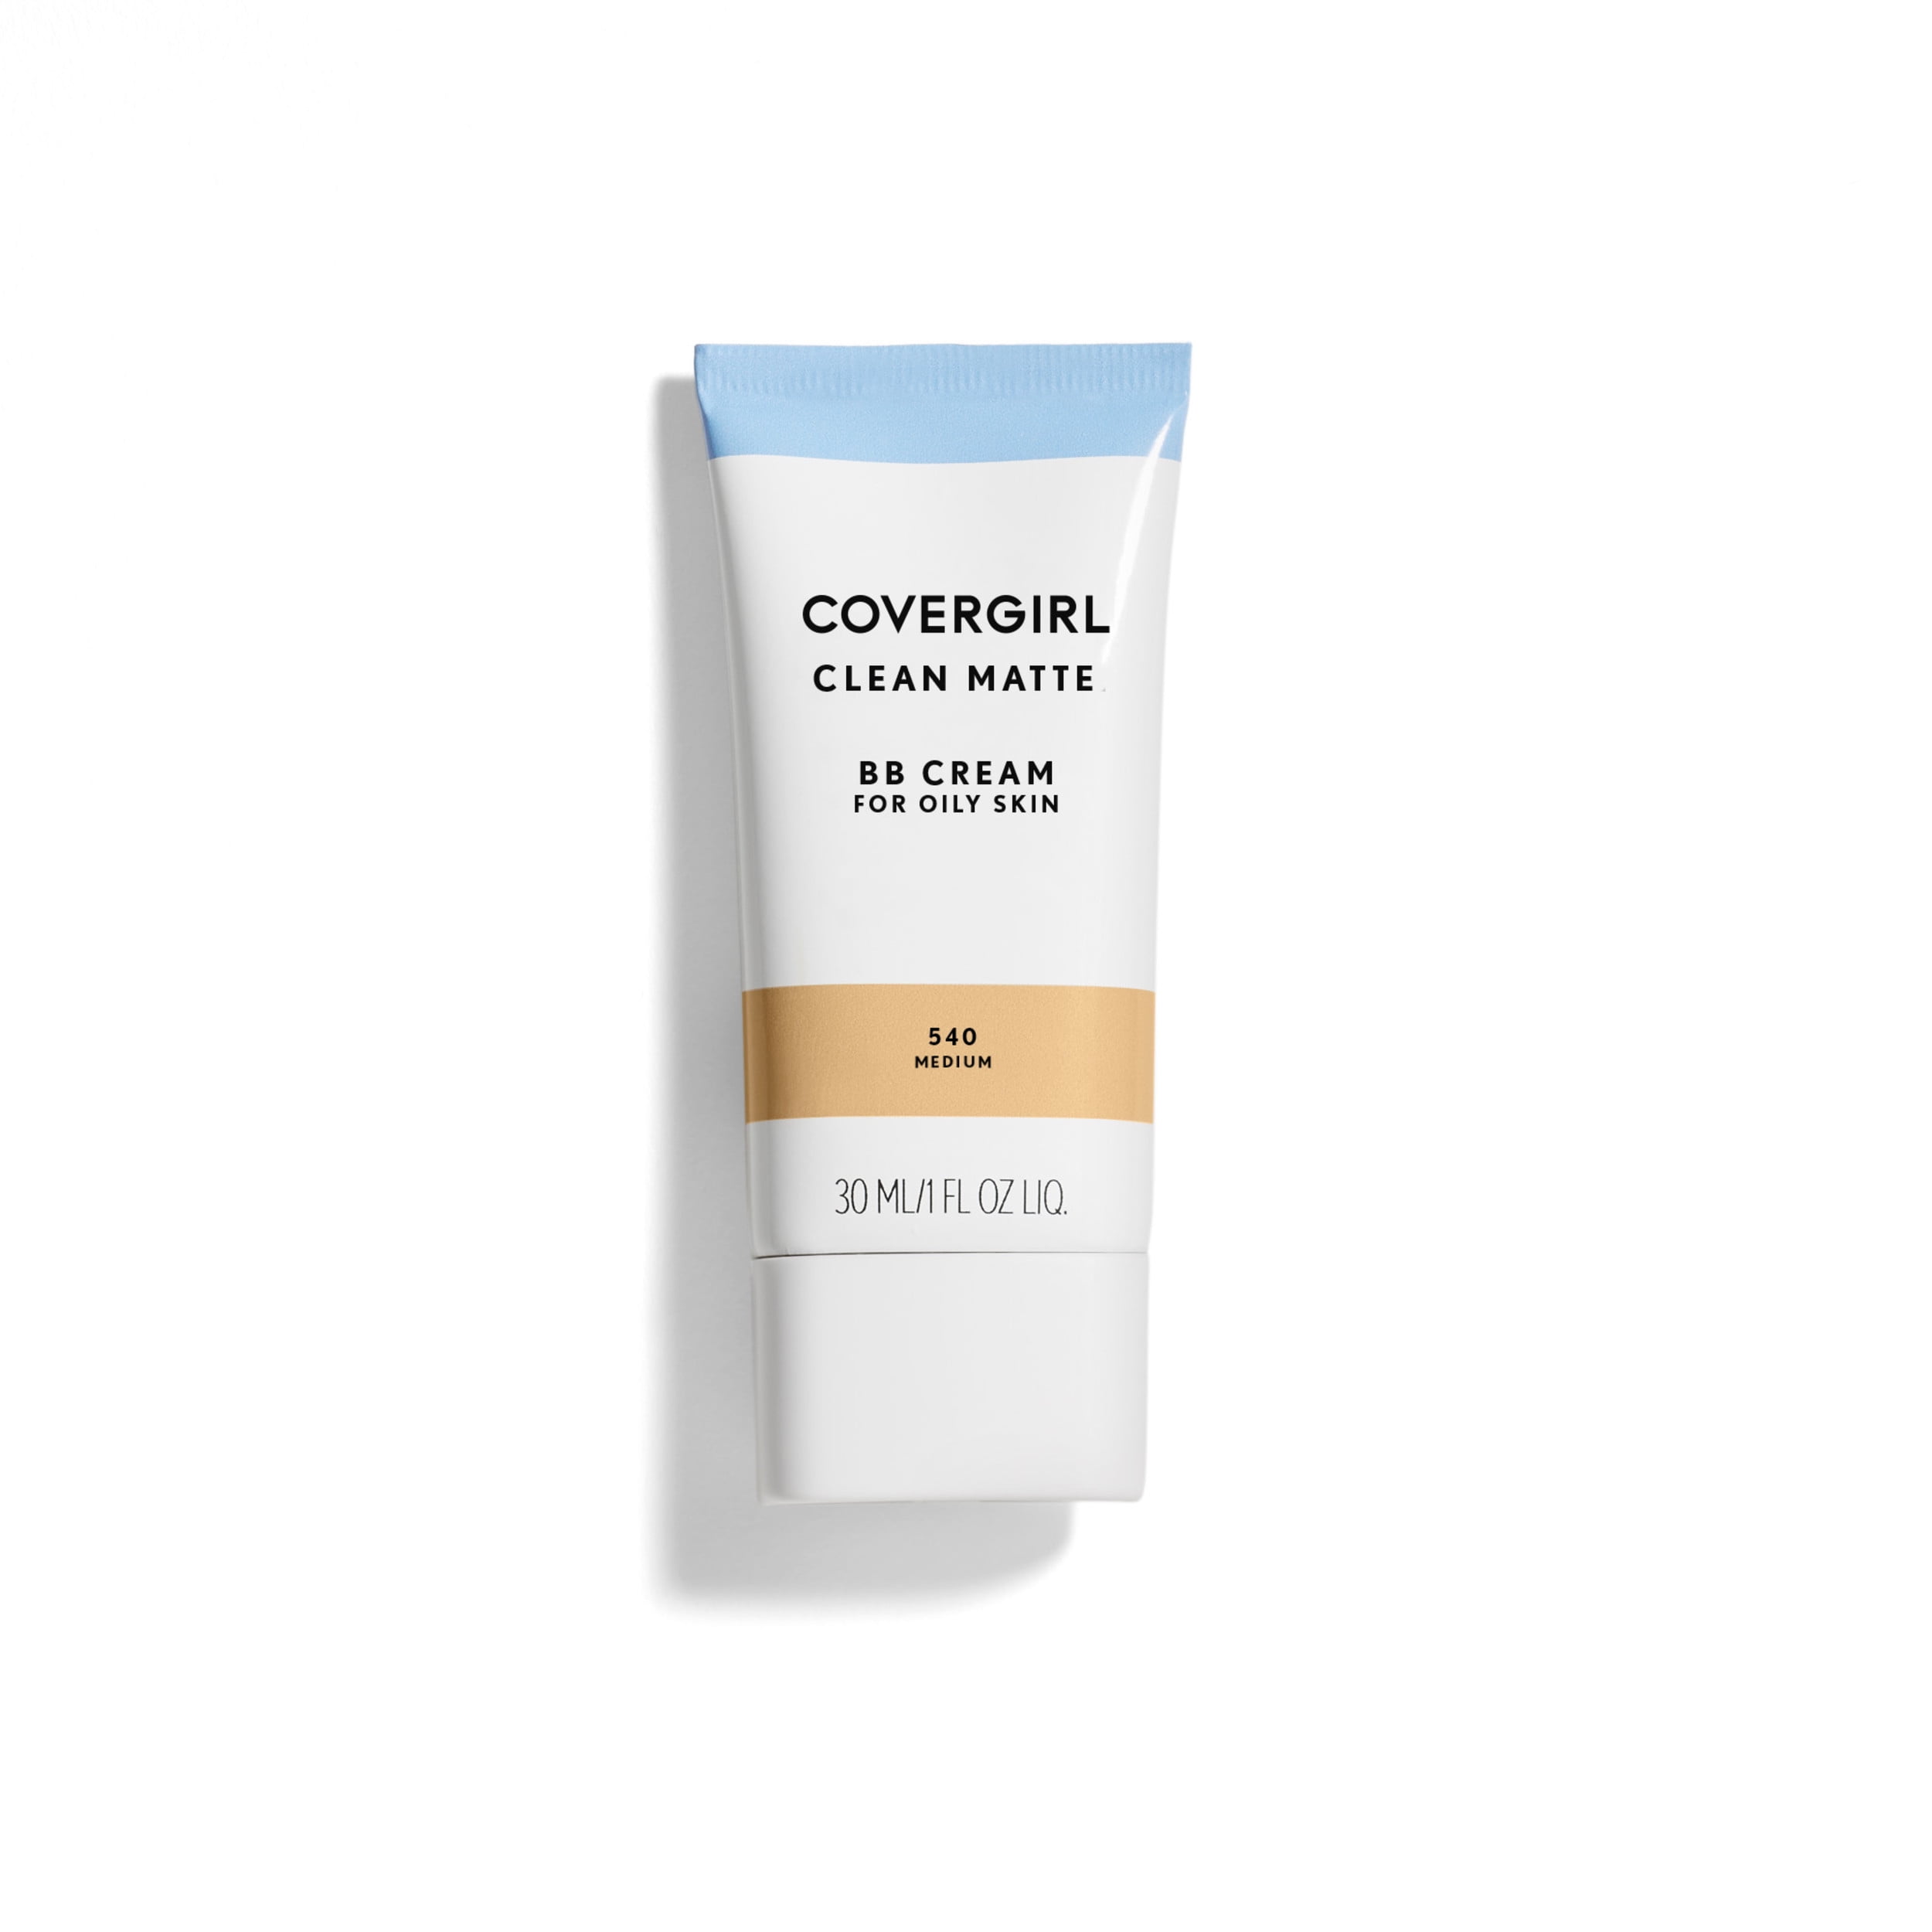 COVERGIRL Clean Matte BB Cream For Oily Skin, 540 Medium, 1 fl oz, Oil-Free Finish BB Cream, BB Cream Foundation, No Clogged Pores, Evens Skin Tone and Hides Blemishes, Water Based Foundation